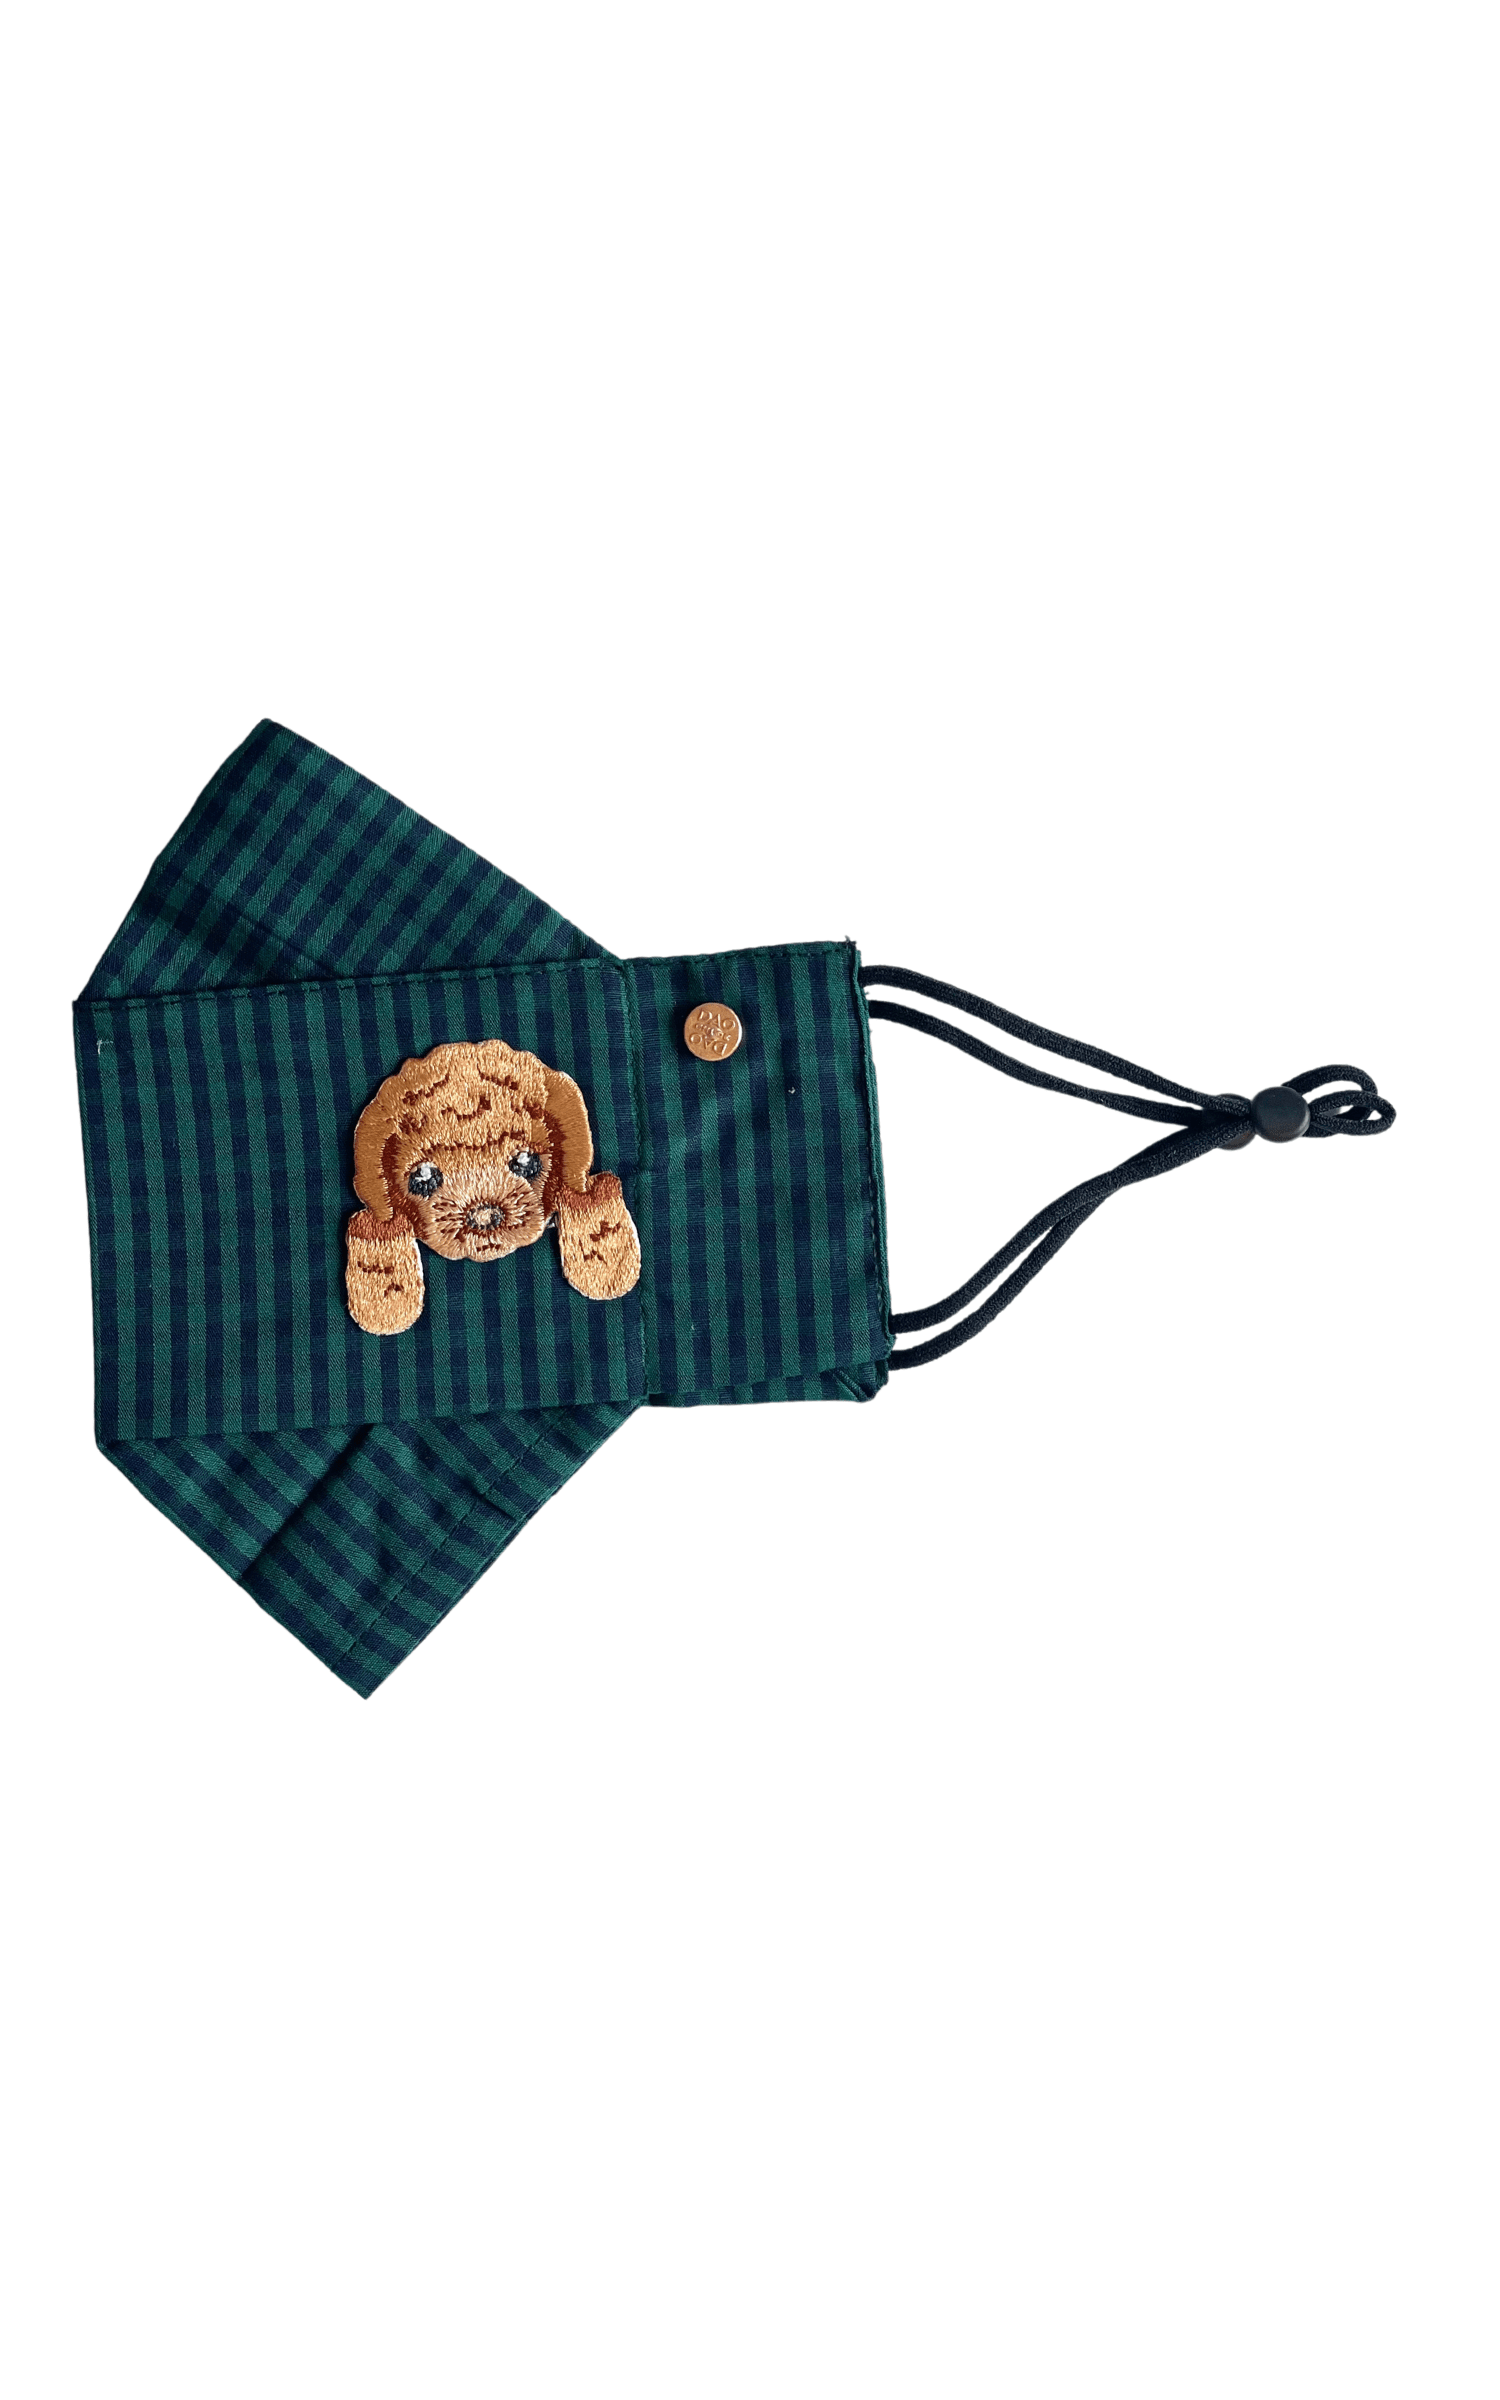 Box Pleated Face Masks Poodle Green Gingham Box Pleat Mask ( w Filter Pocket) - Chloe Dao